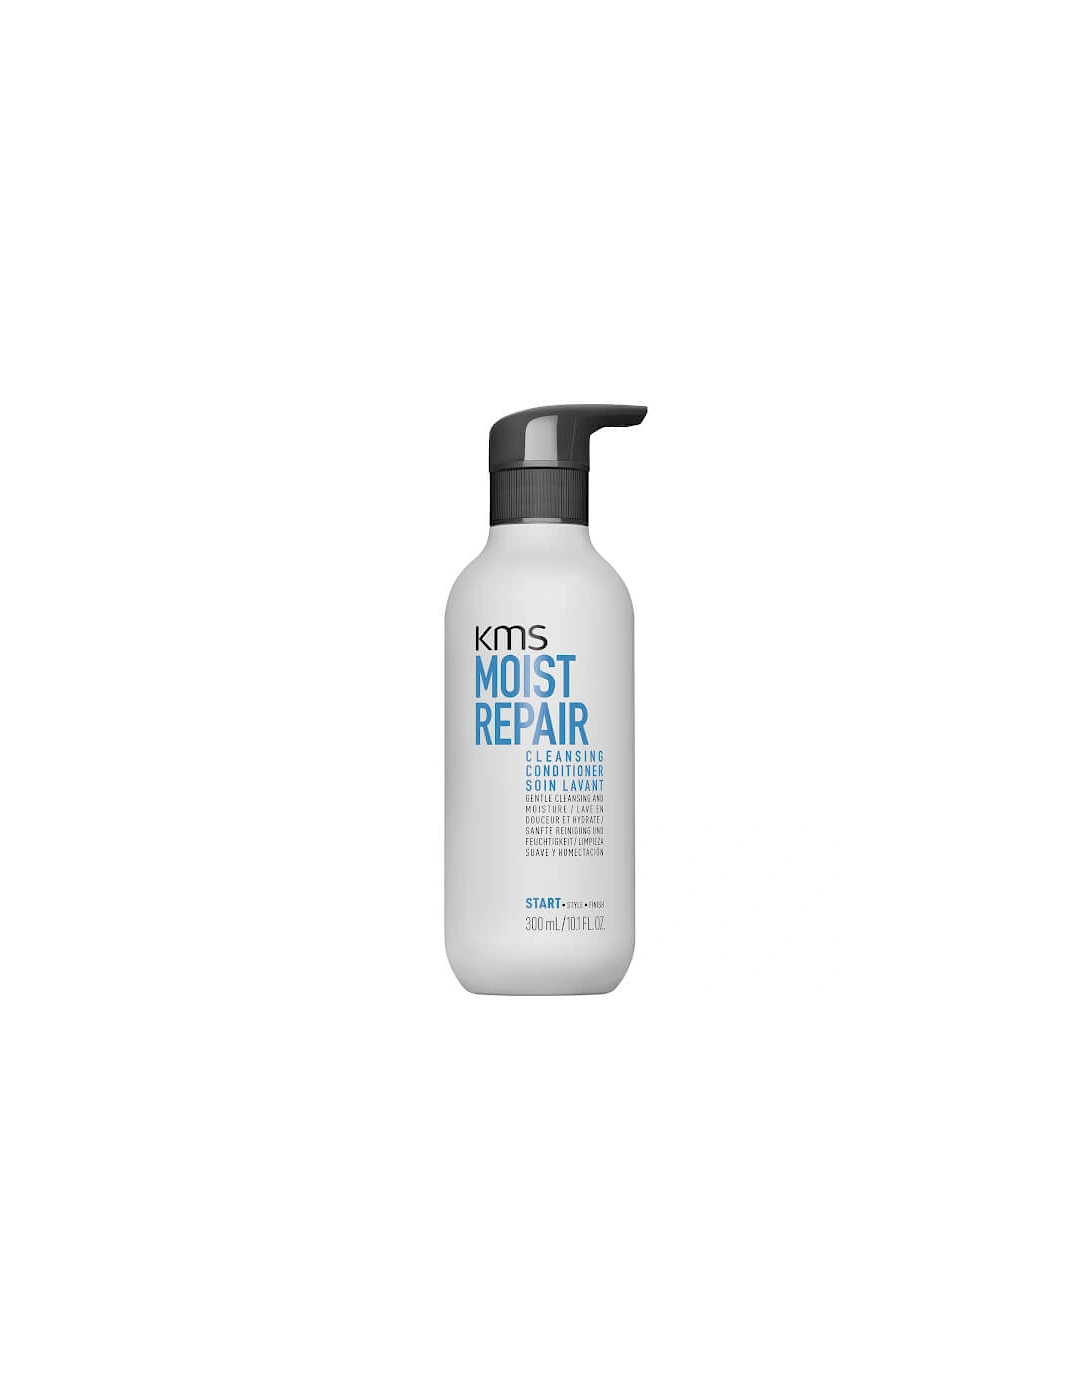 Moist Repair Cleansing Conditioner 300ml - KMS, 2 of 1